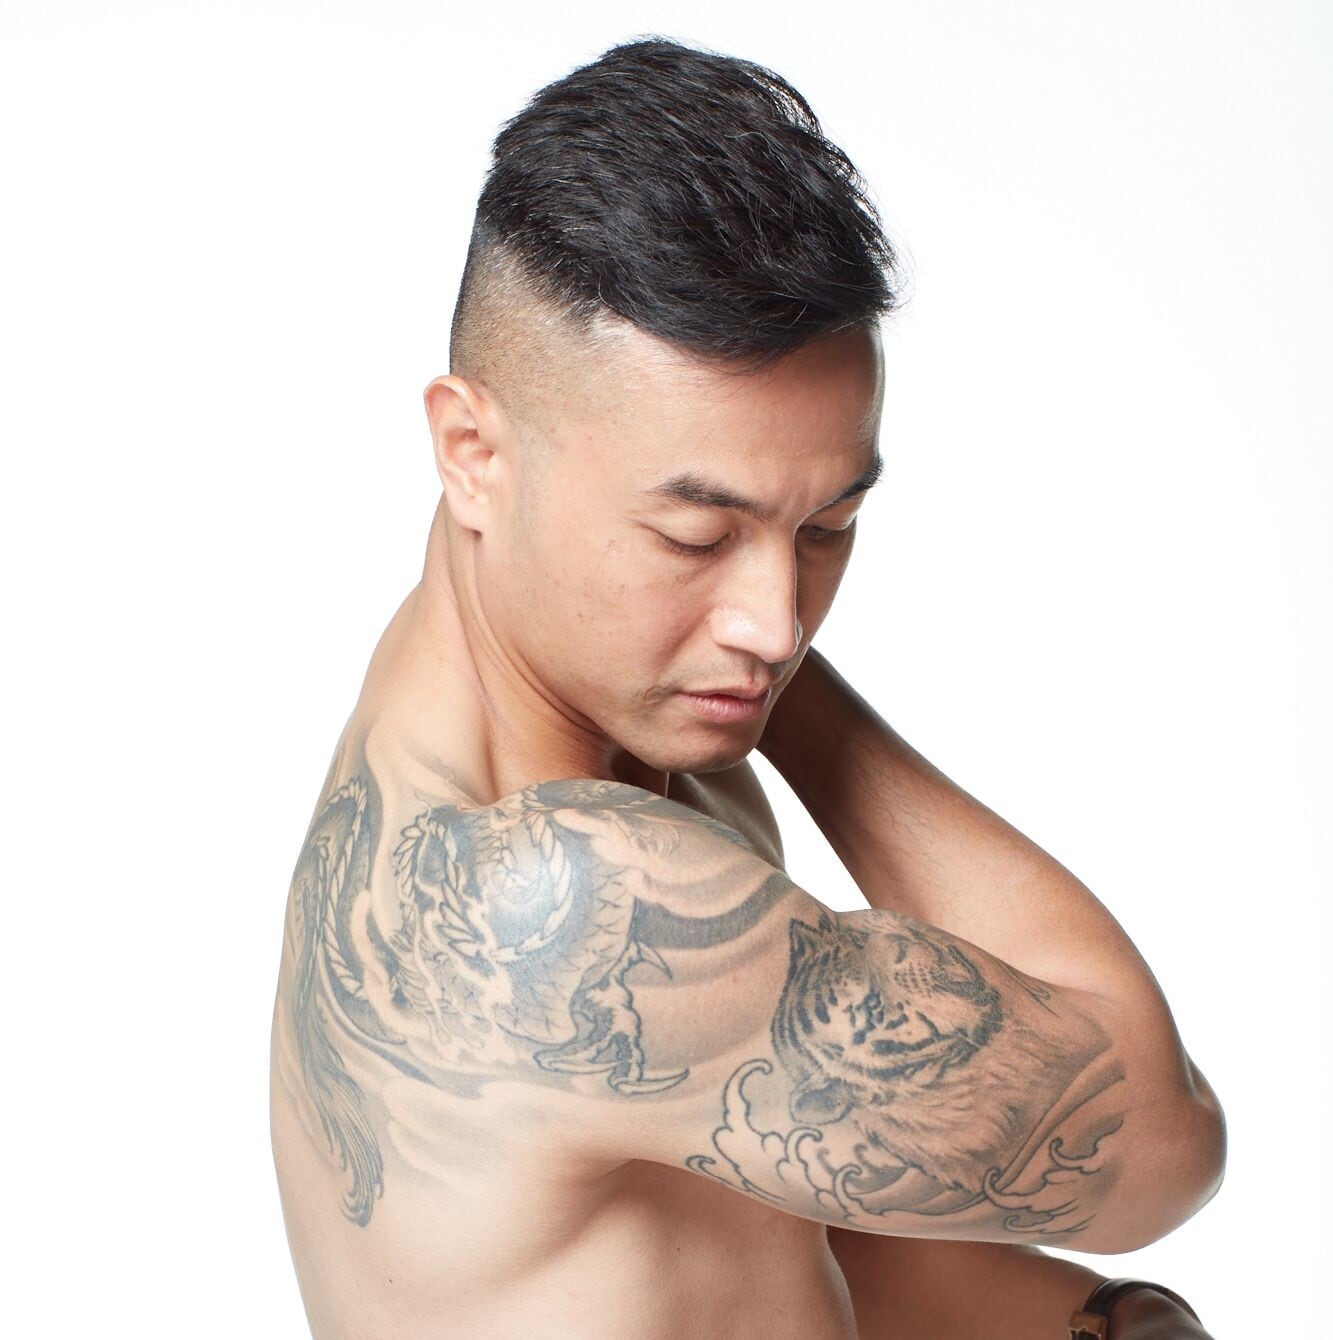 Tattoo Removal Sydney | Laser Removal Treatment | Contour Clinics